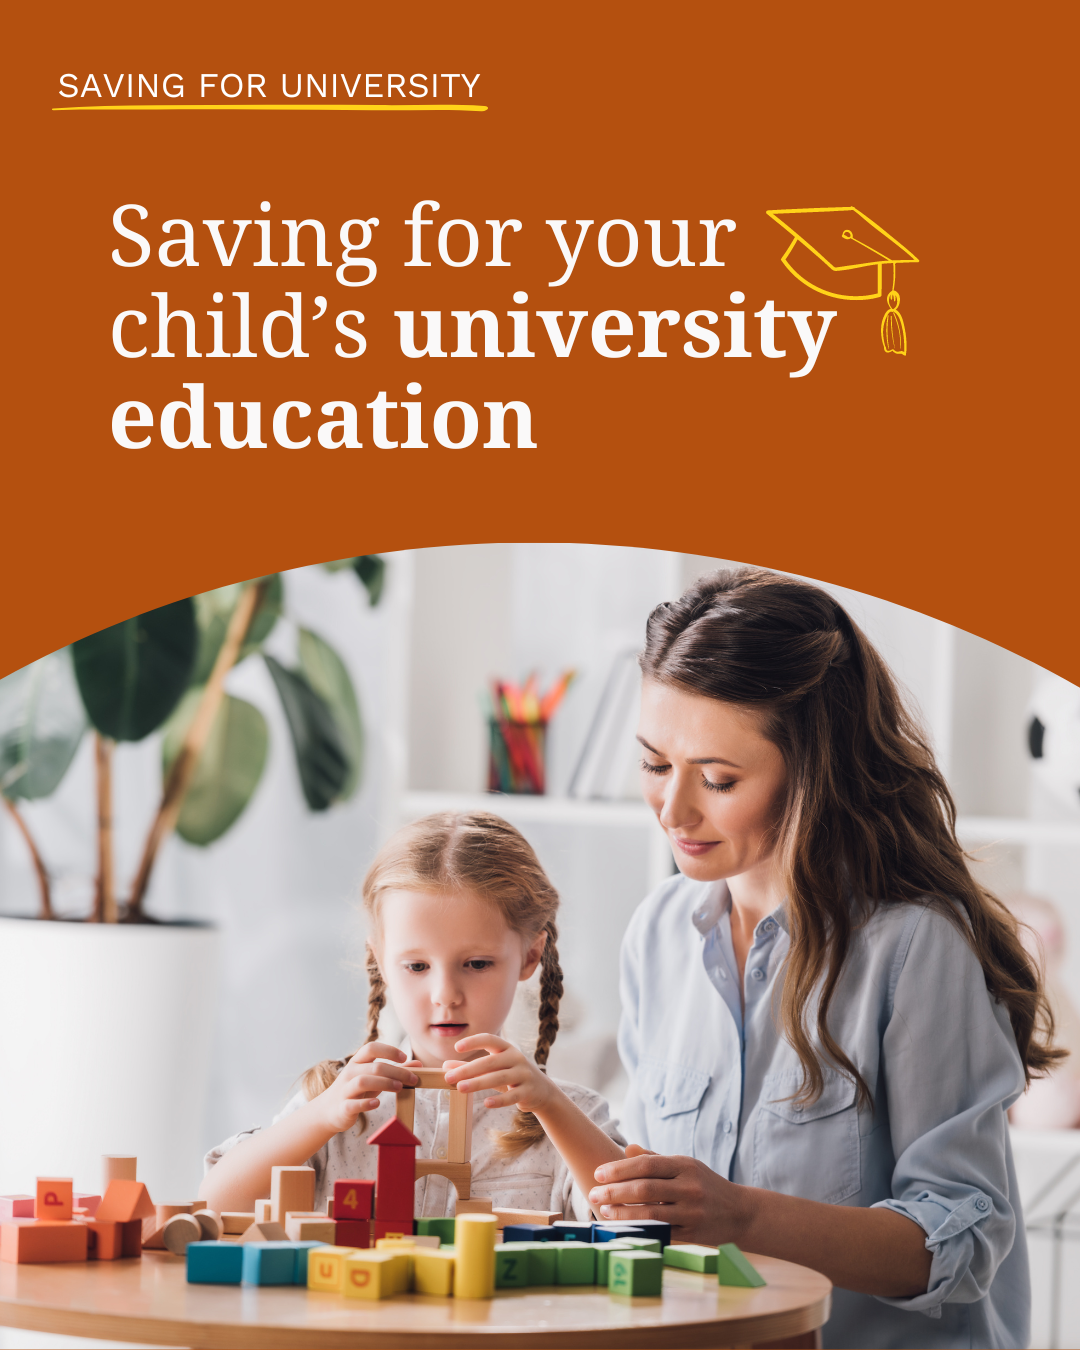 Saving for your child’s university education